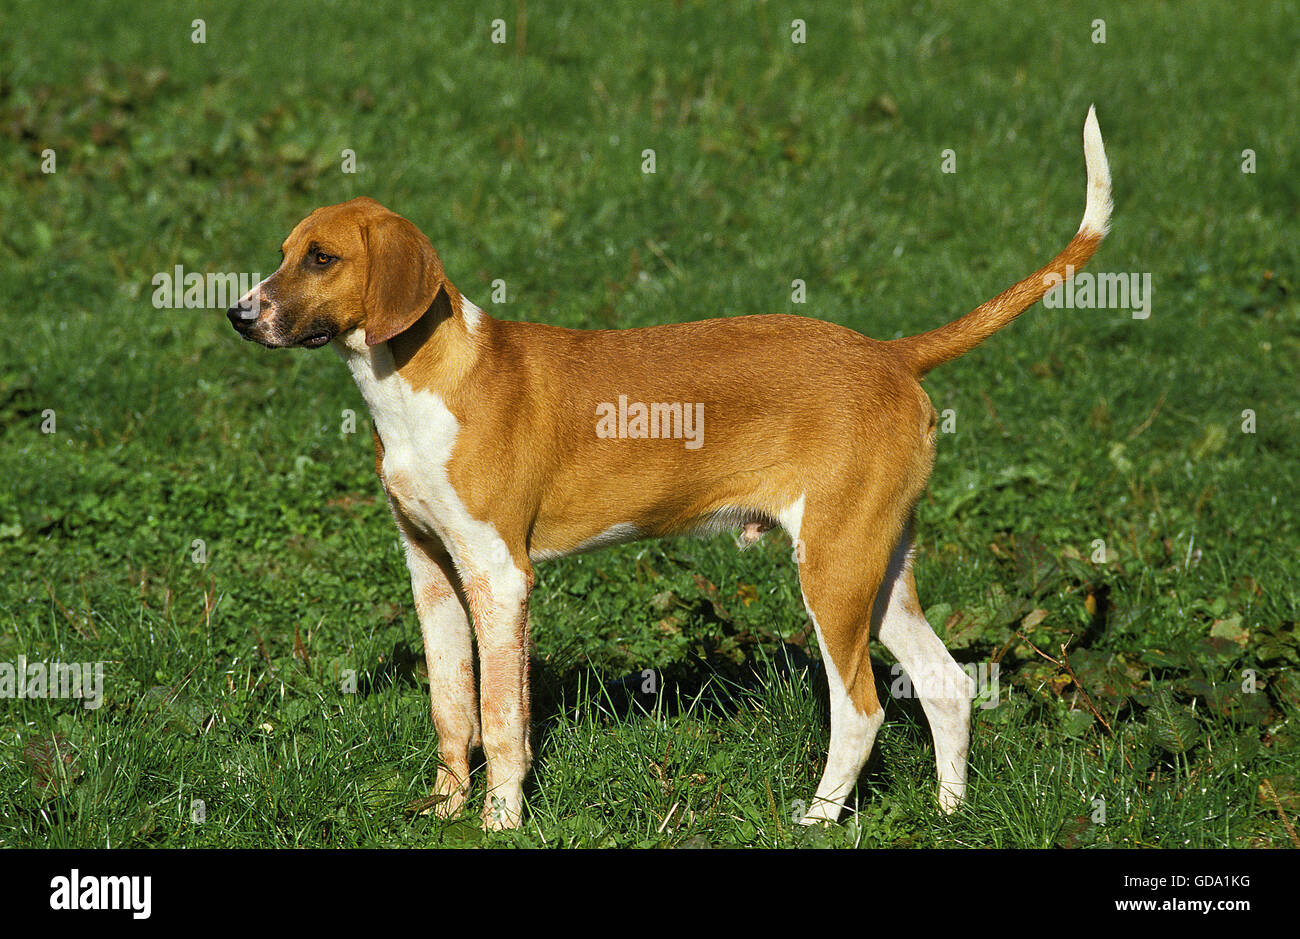 GREAT ANGLO-FRENCH WHITE AND ORANGE HOUND, MALE STANDING ON GRASS Stock Photo